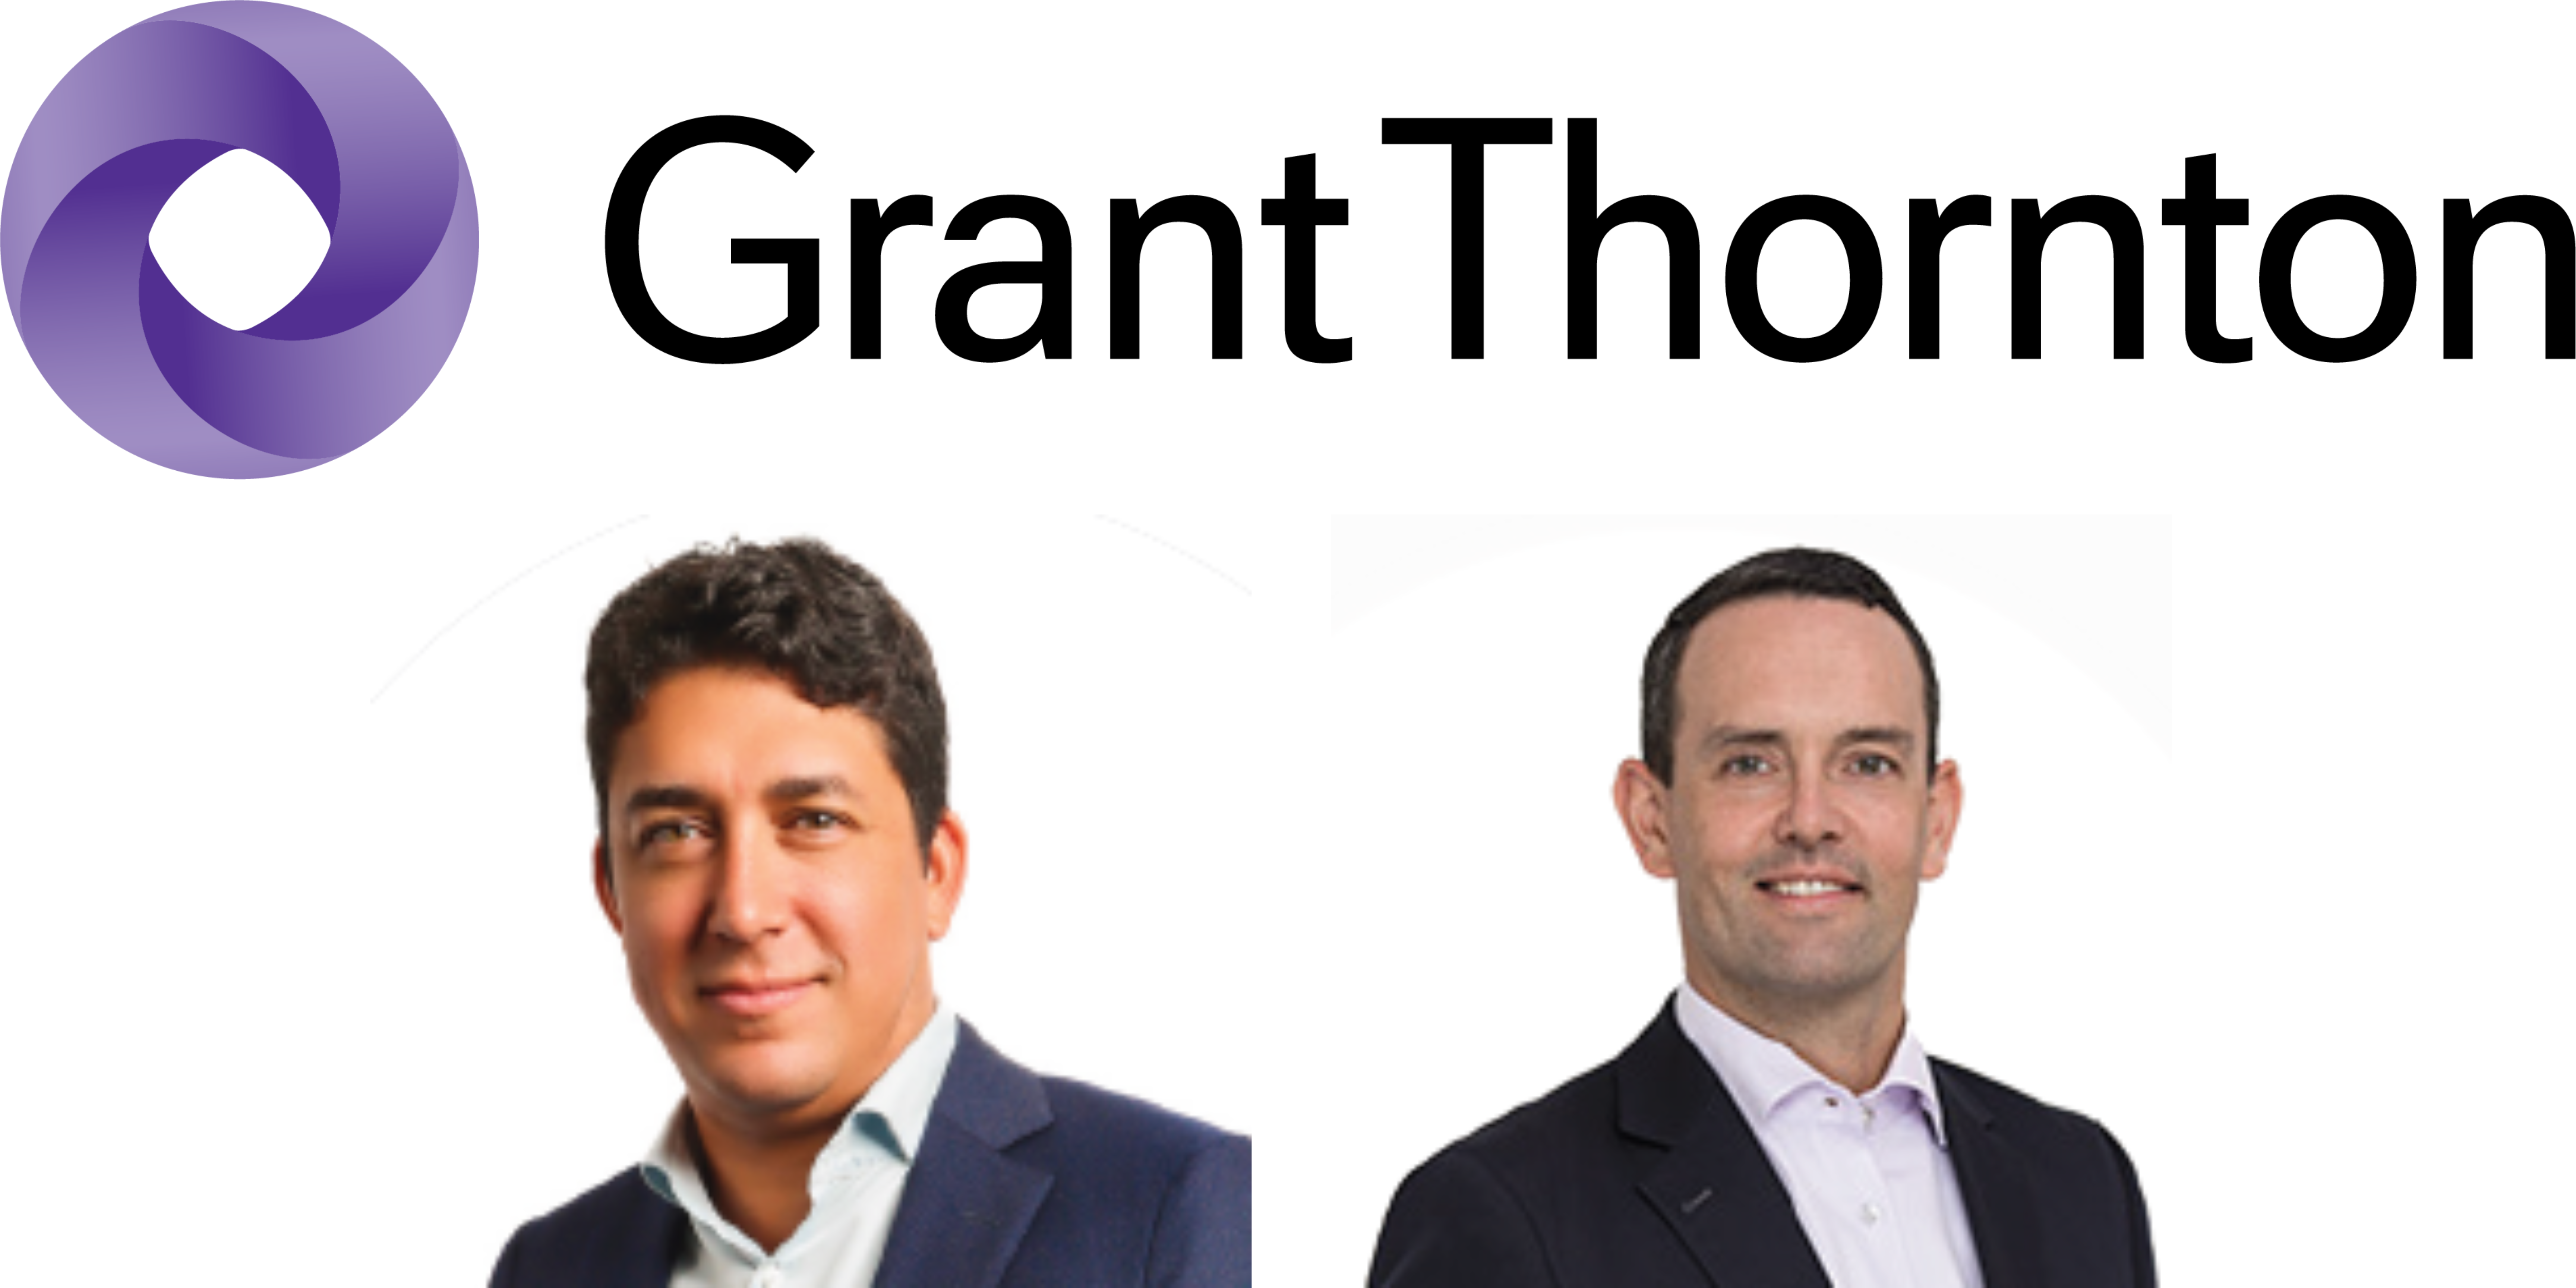 Grant Thornton To Discuss The Future Of Finance At SMILE